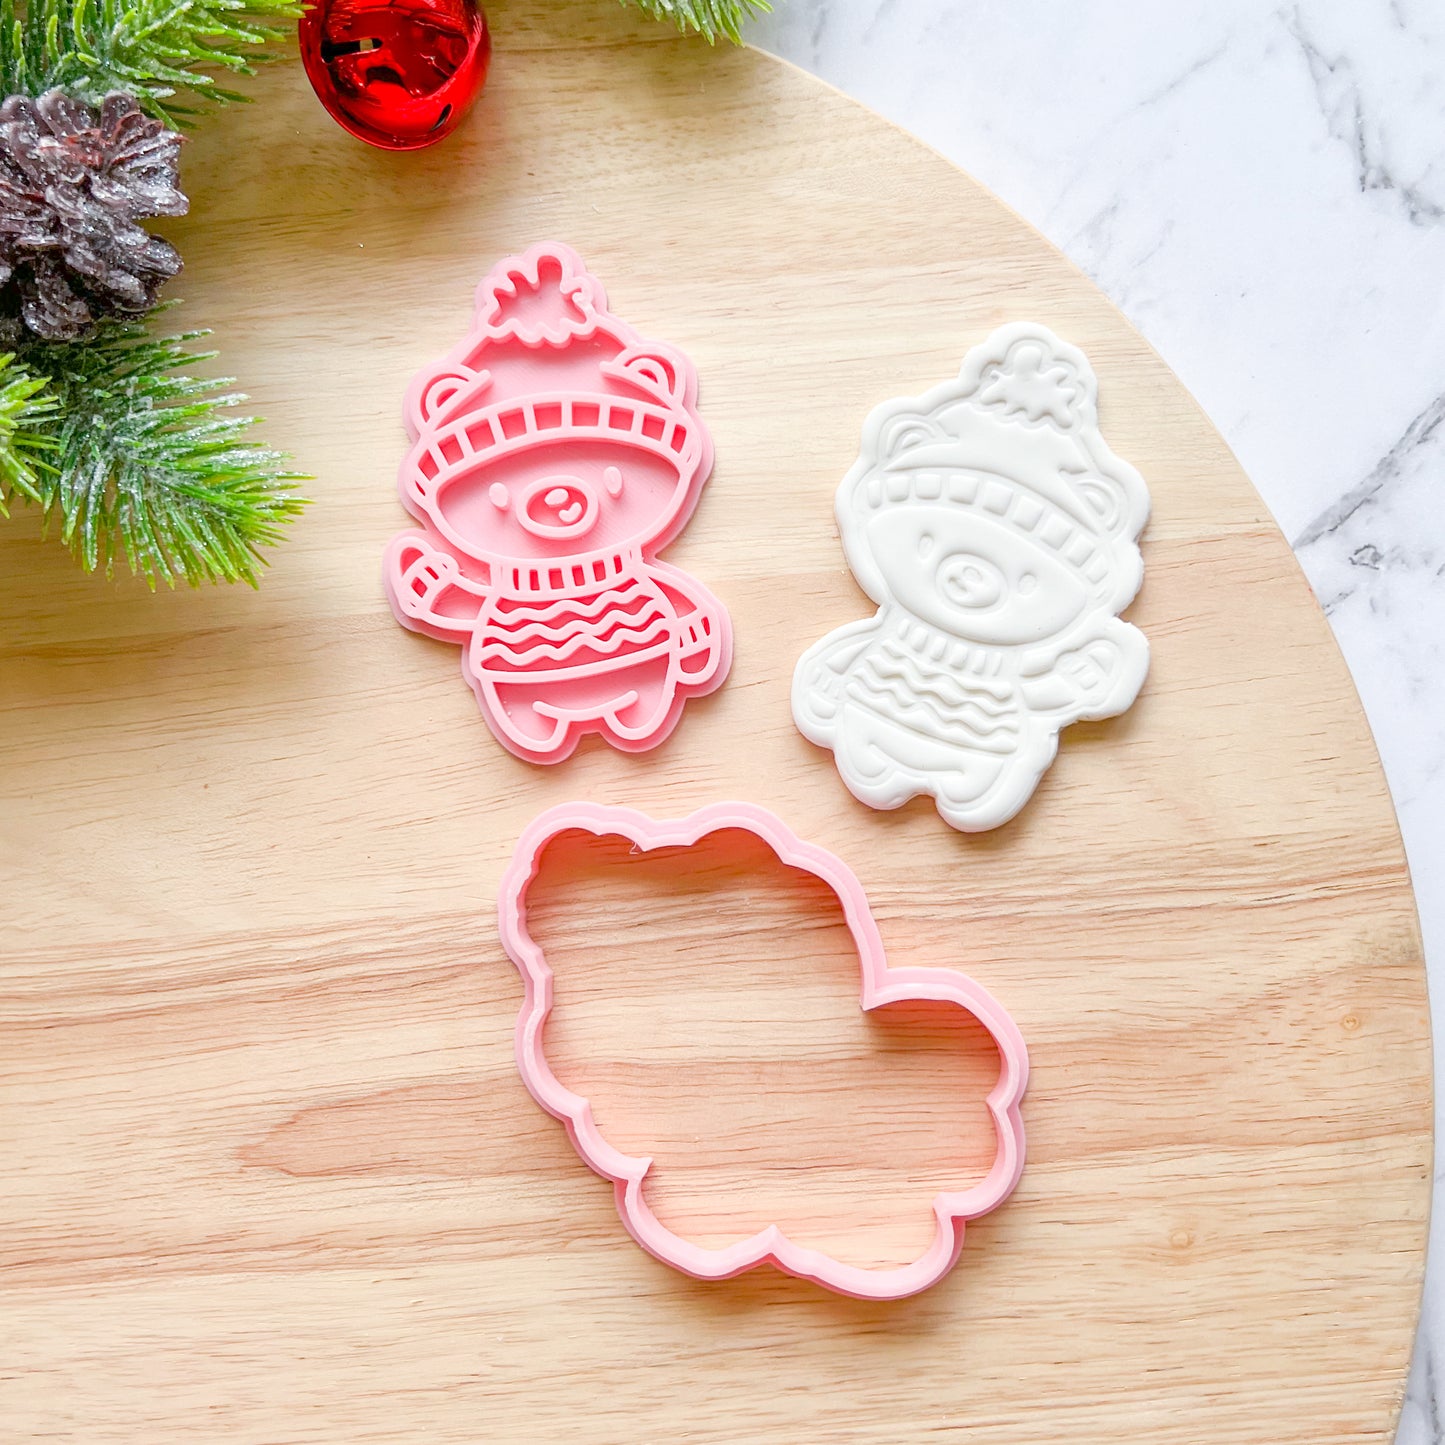 "Sweater Bear" Cookie Cutter & Stamp